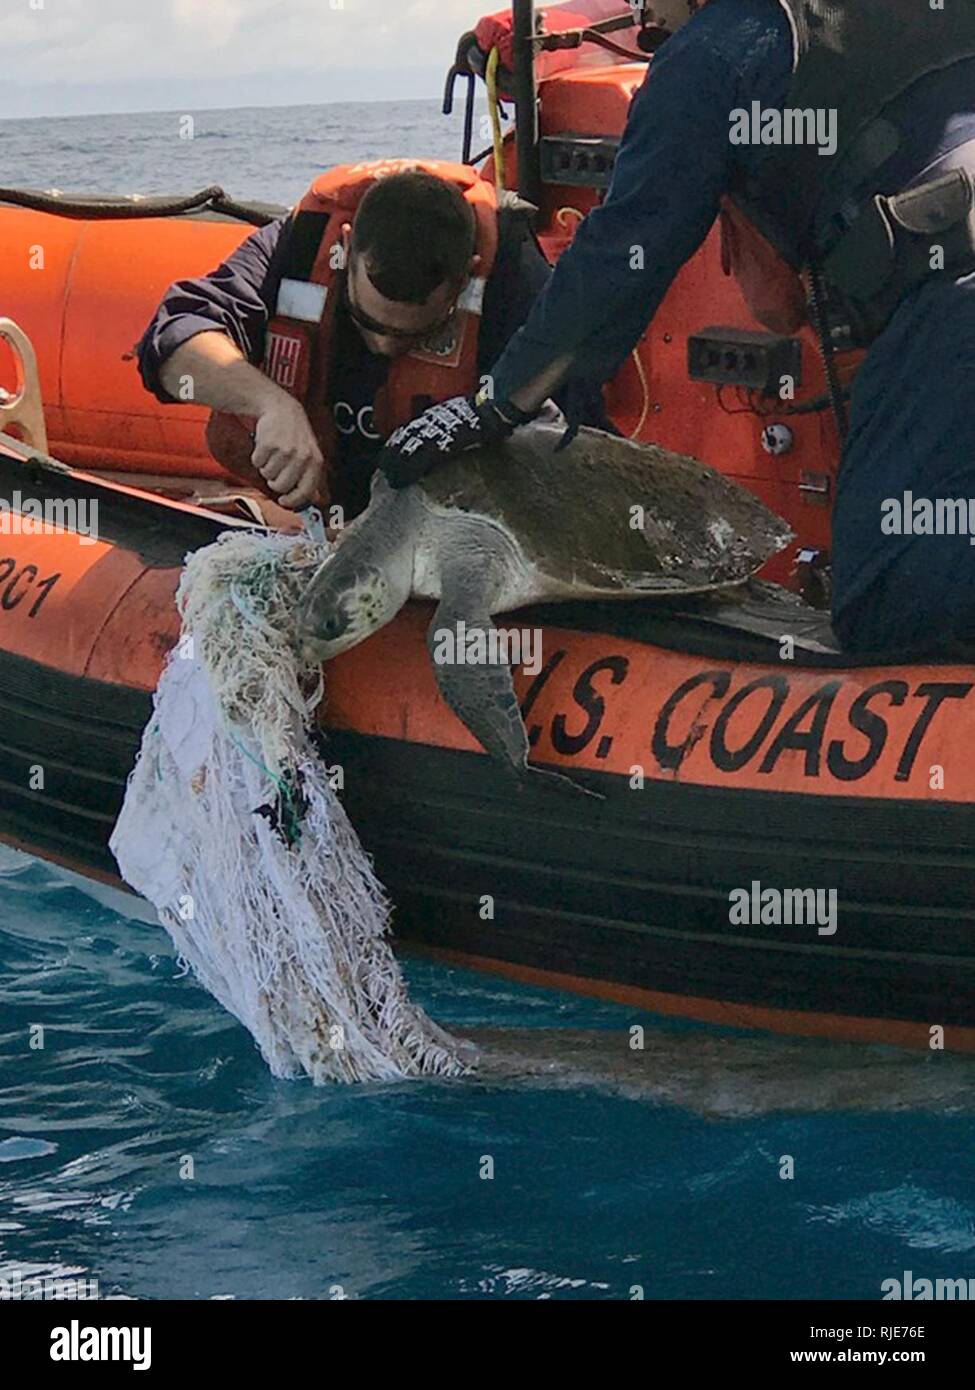 A crewman from Coast Guard Cutter Diligence cuts netting to free an ensnared sea turtle in Eastern Pacific waters, Jan. 11, 2018. During their 65-day counter-drug patrol, the Diligence crew spotted and freed three entangled turtles. Stock Photo